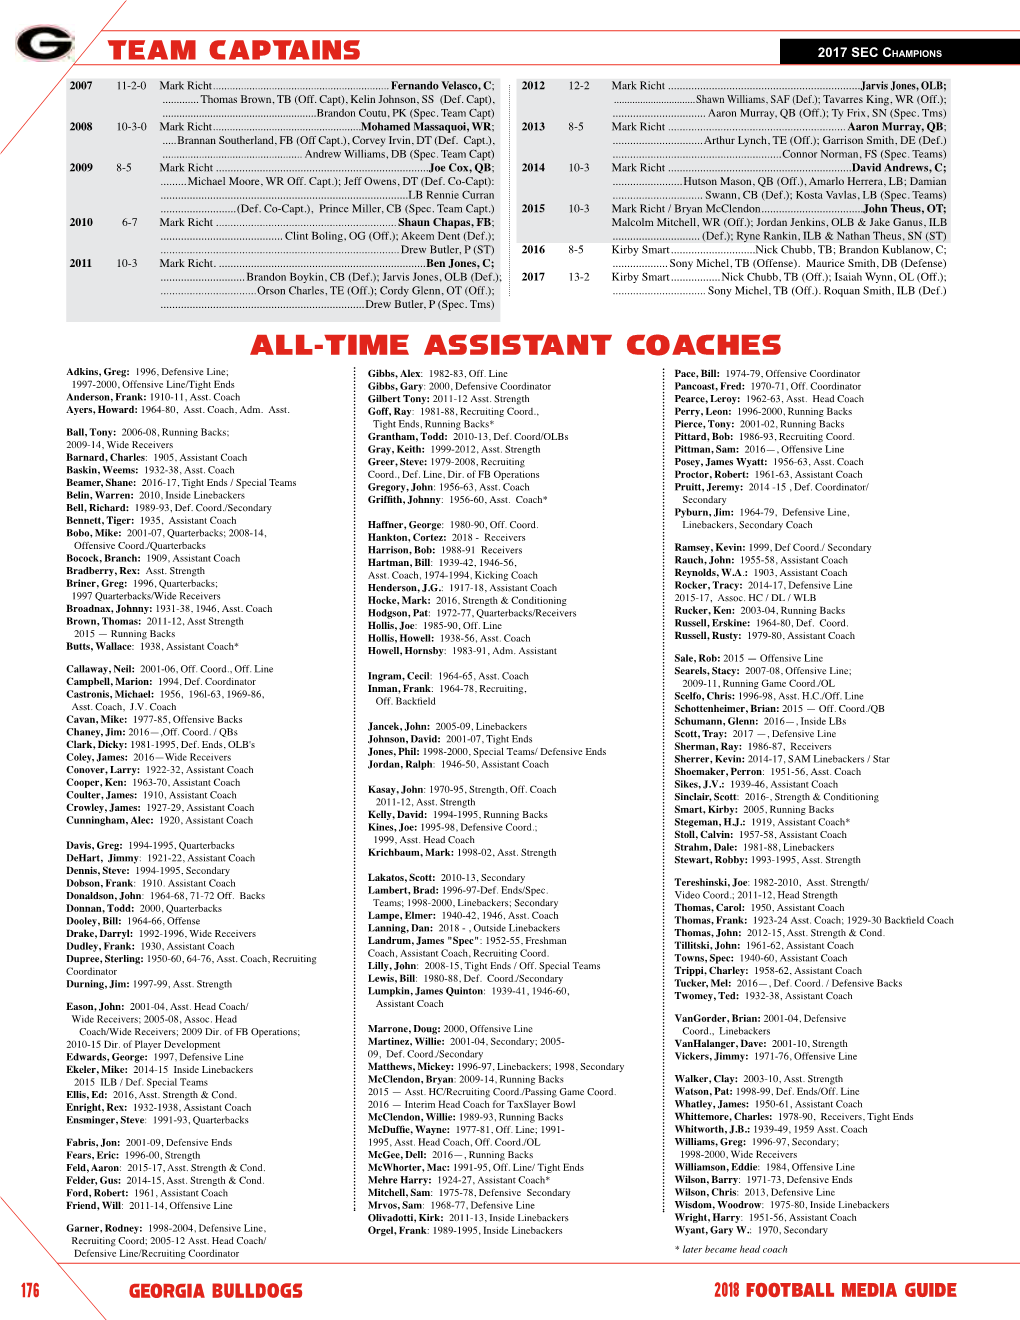 ALL-TIME ASSISTANT COACHES Adkins, Greg: 1996, Defensive Line; Gibbs, Alex: 1982-83, Off